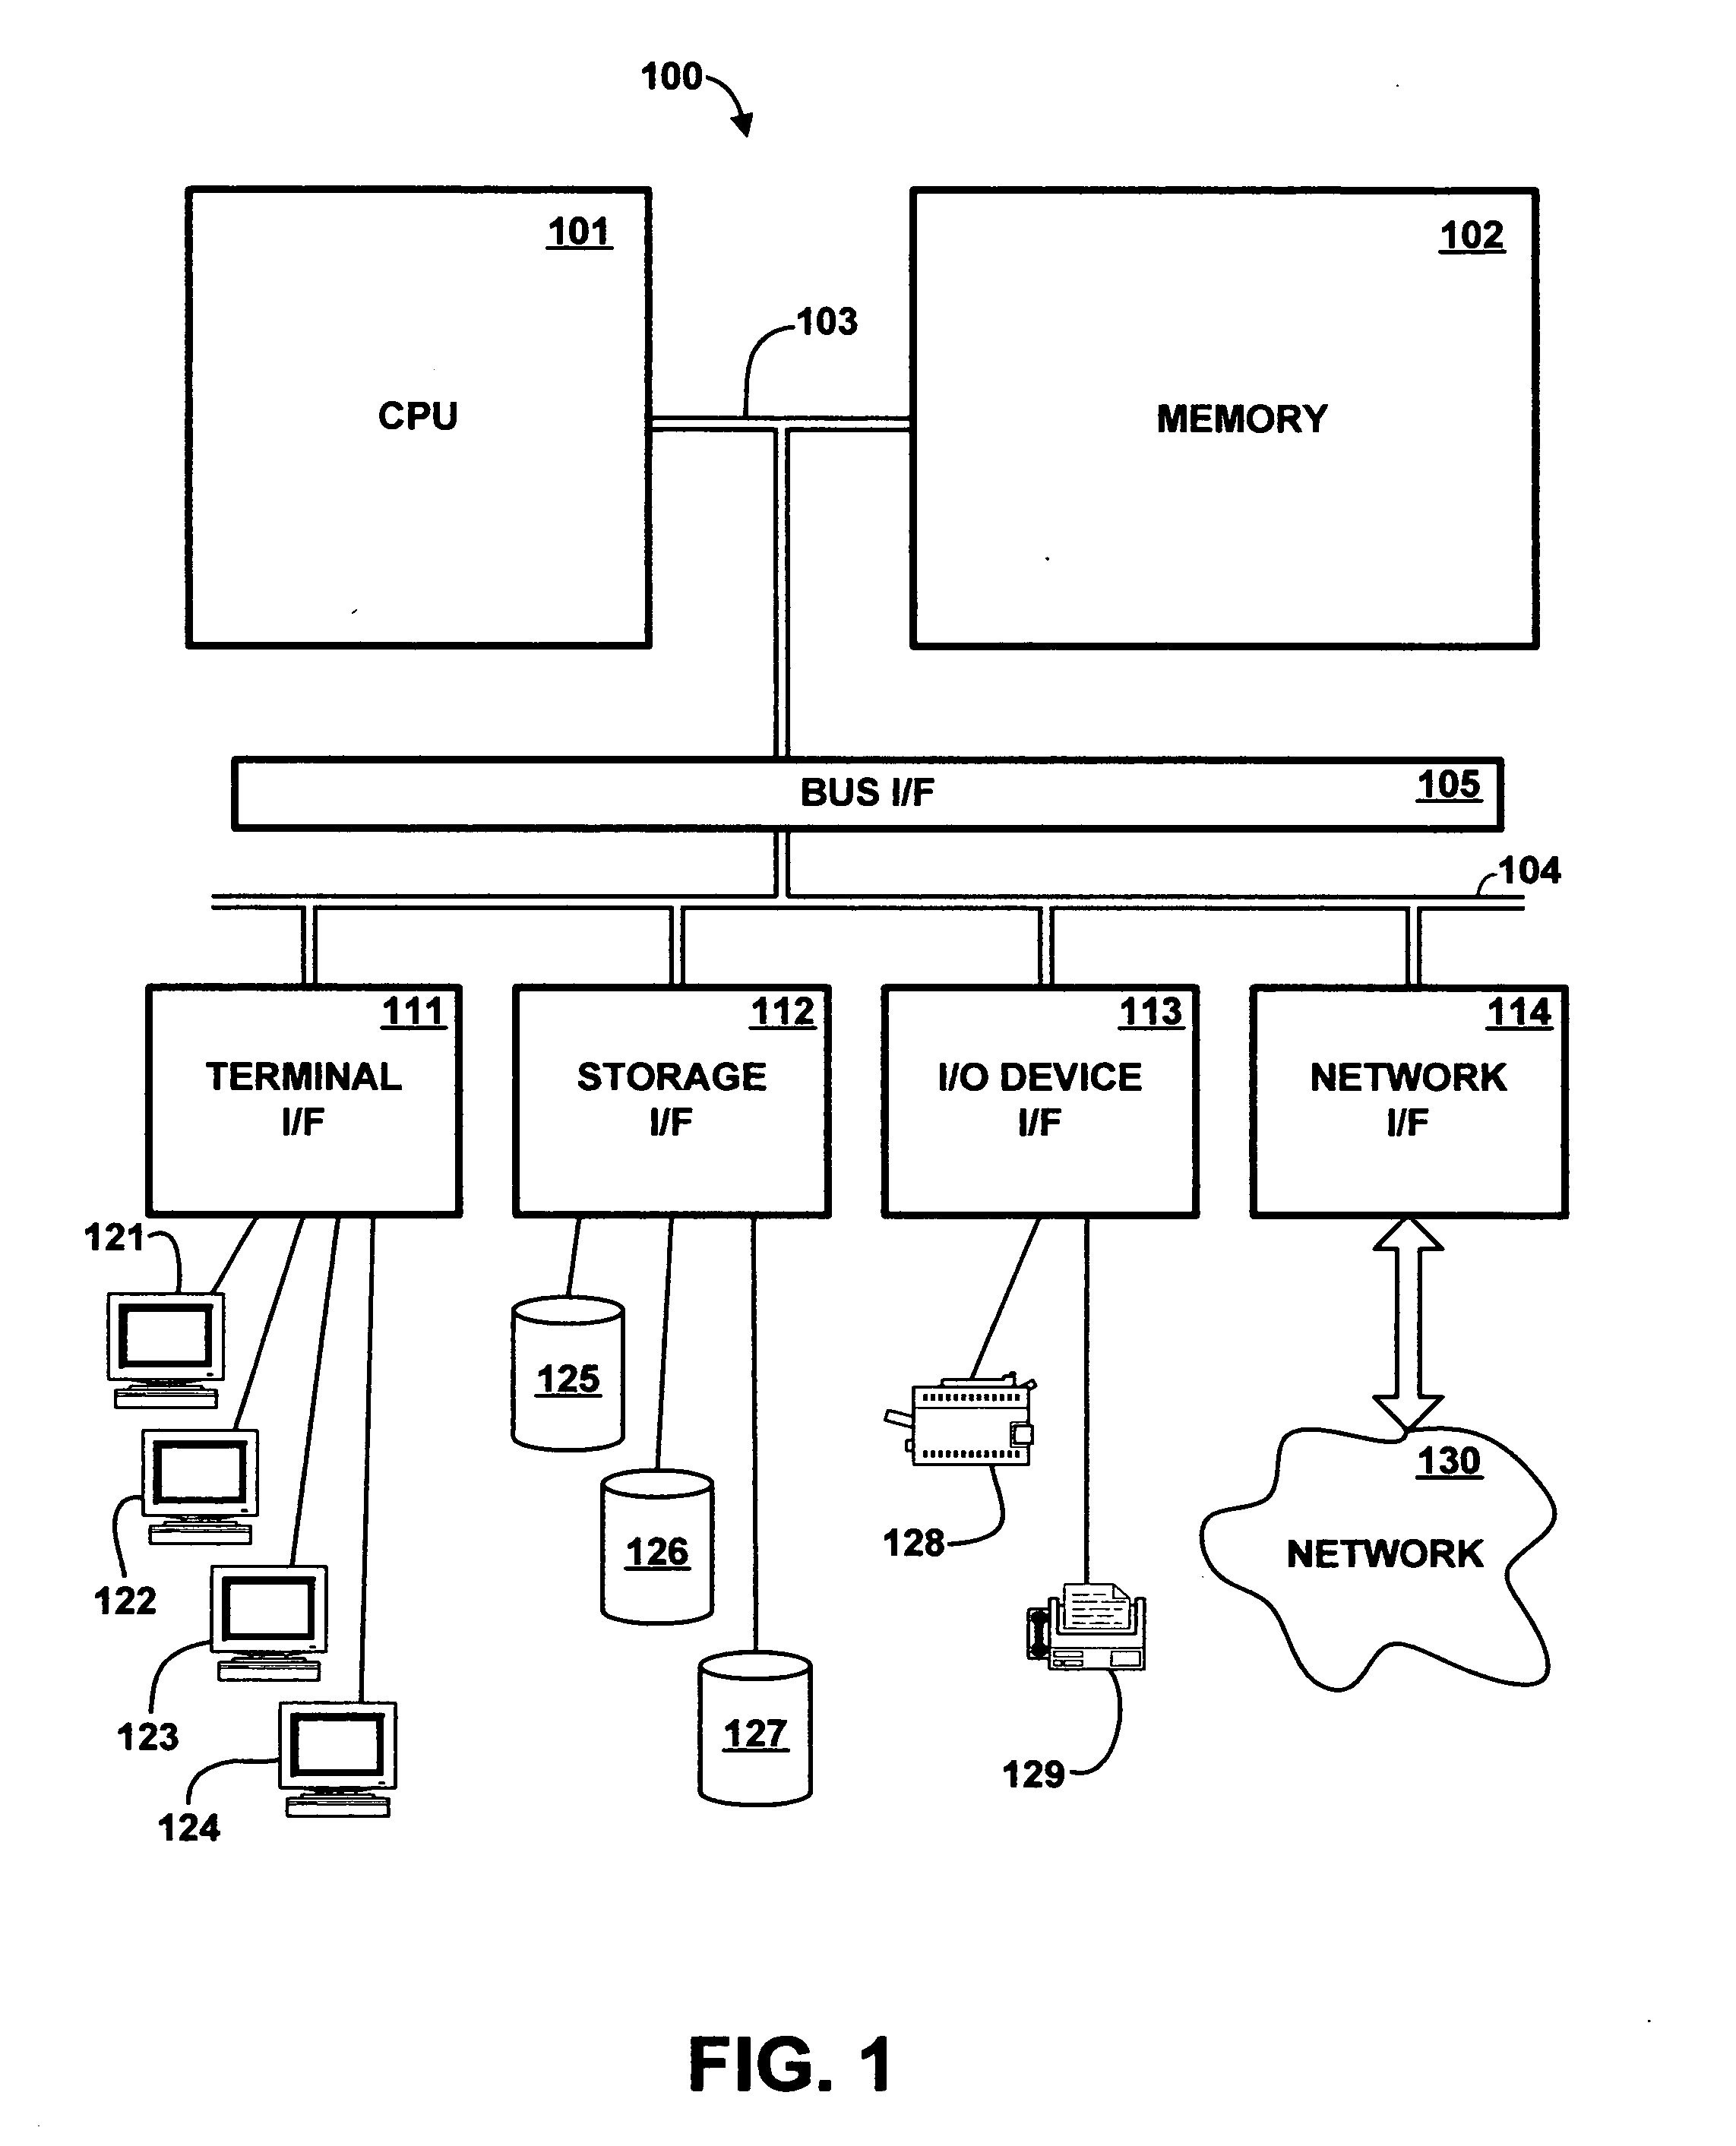 Method and apparatus for predicting relative selectivity of database query conditions using respective cardinalities associated with different subsets of database records